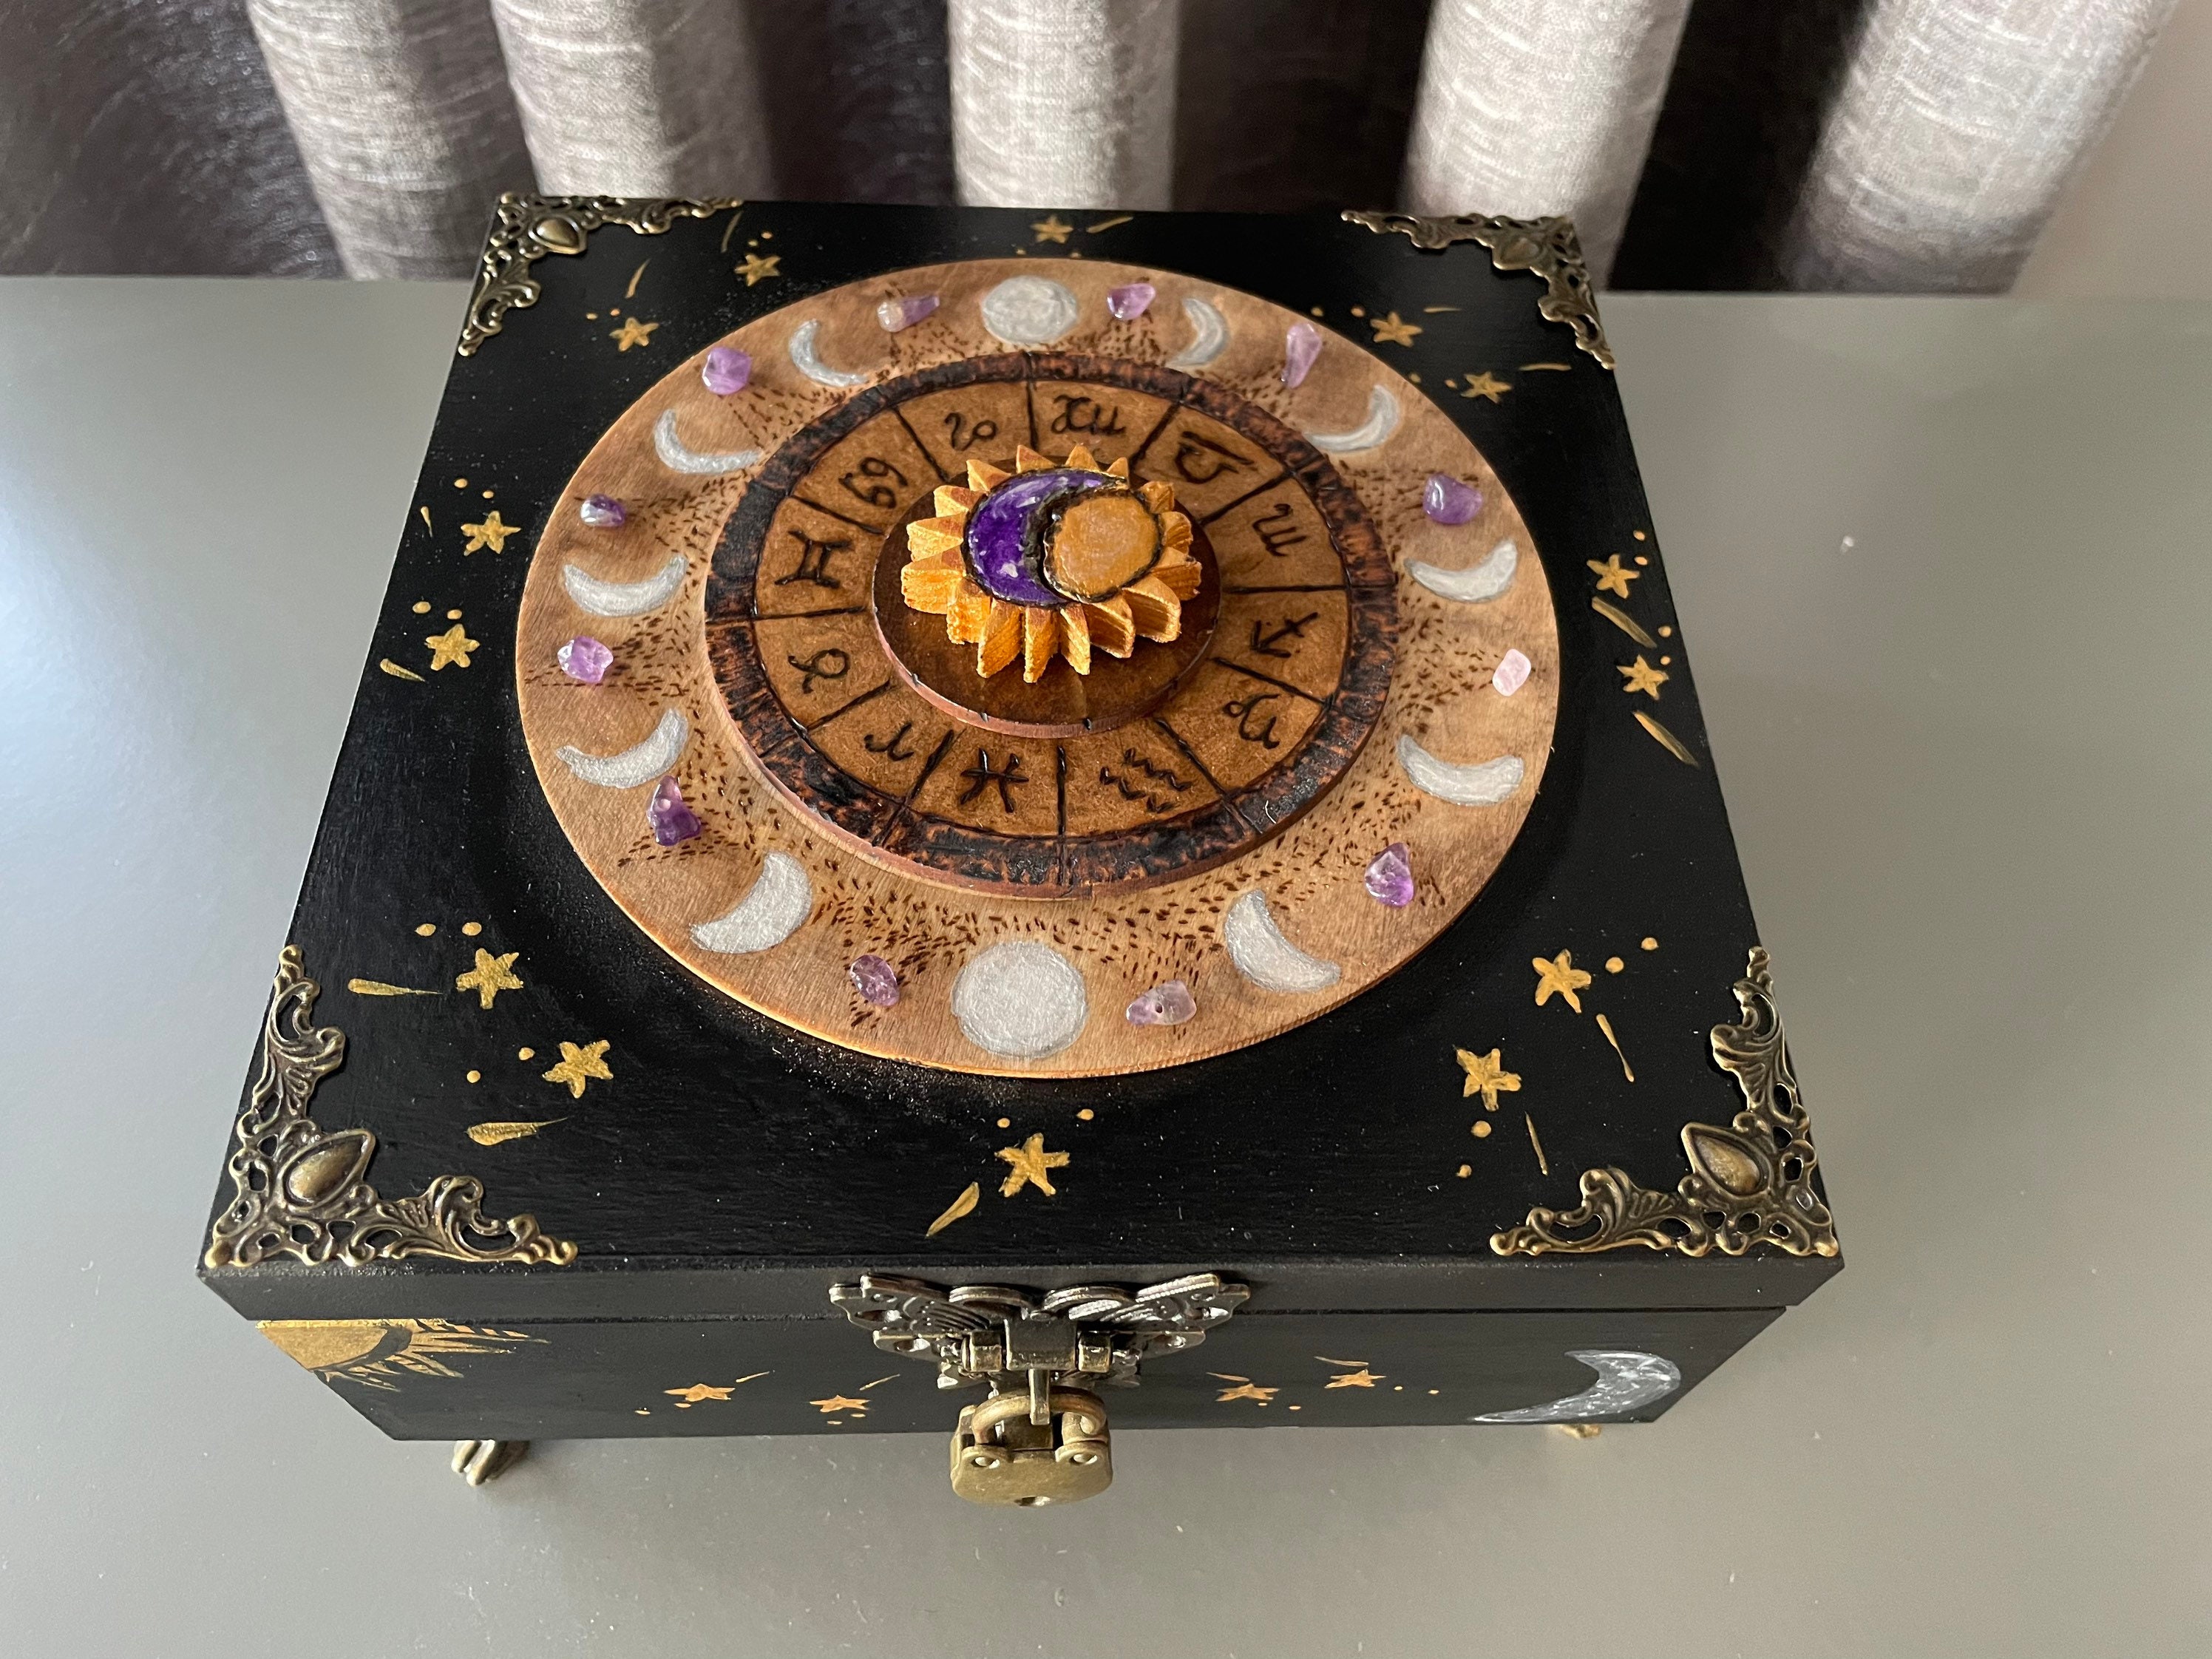 Handmade Phases of the Moon Storage Box, Lunar Moon, Incense